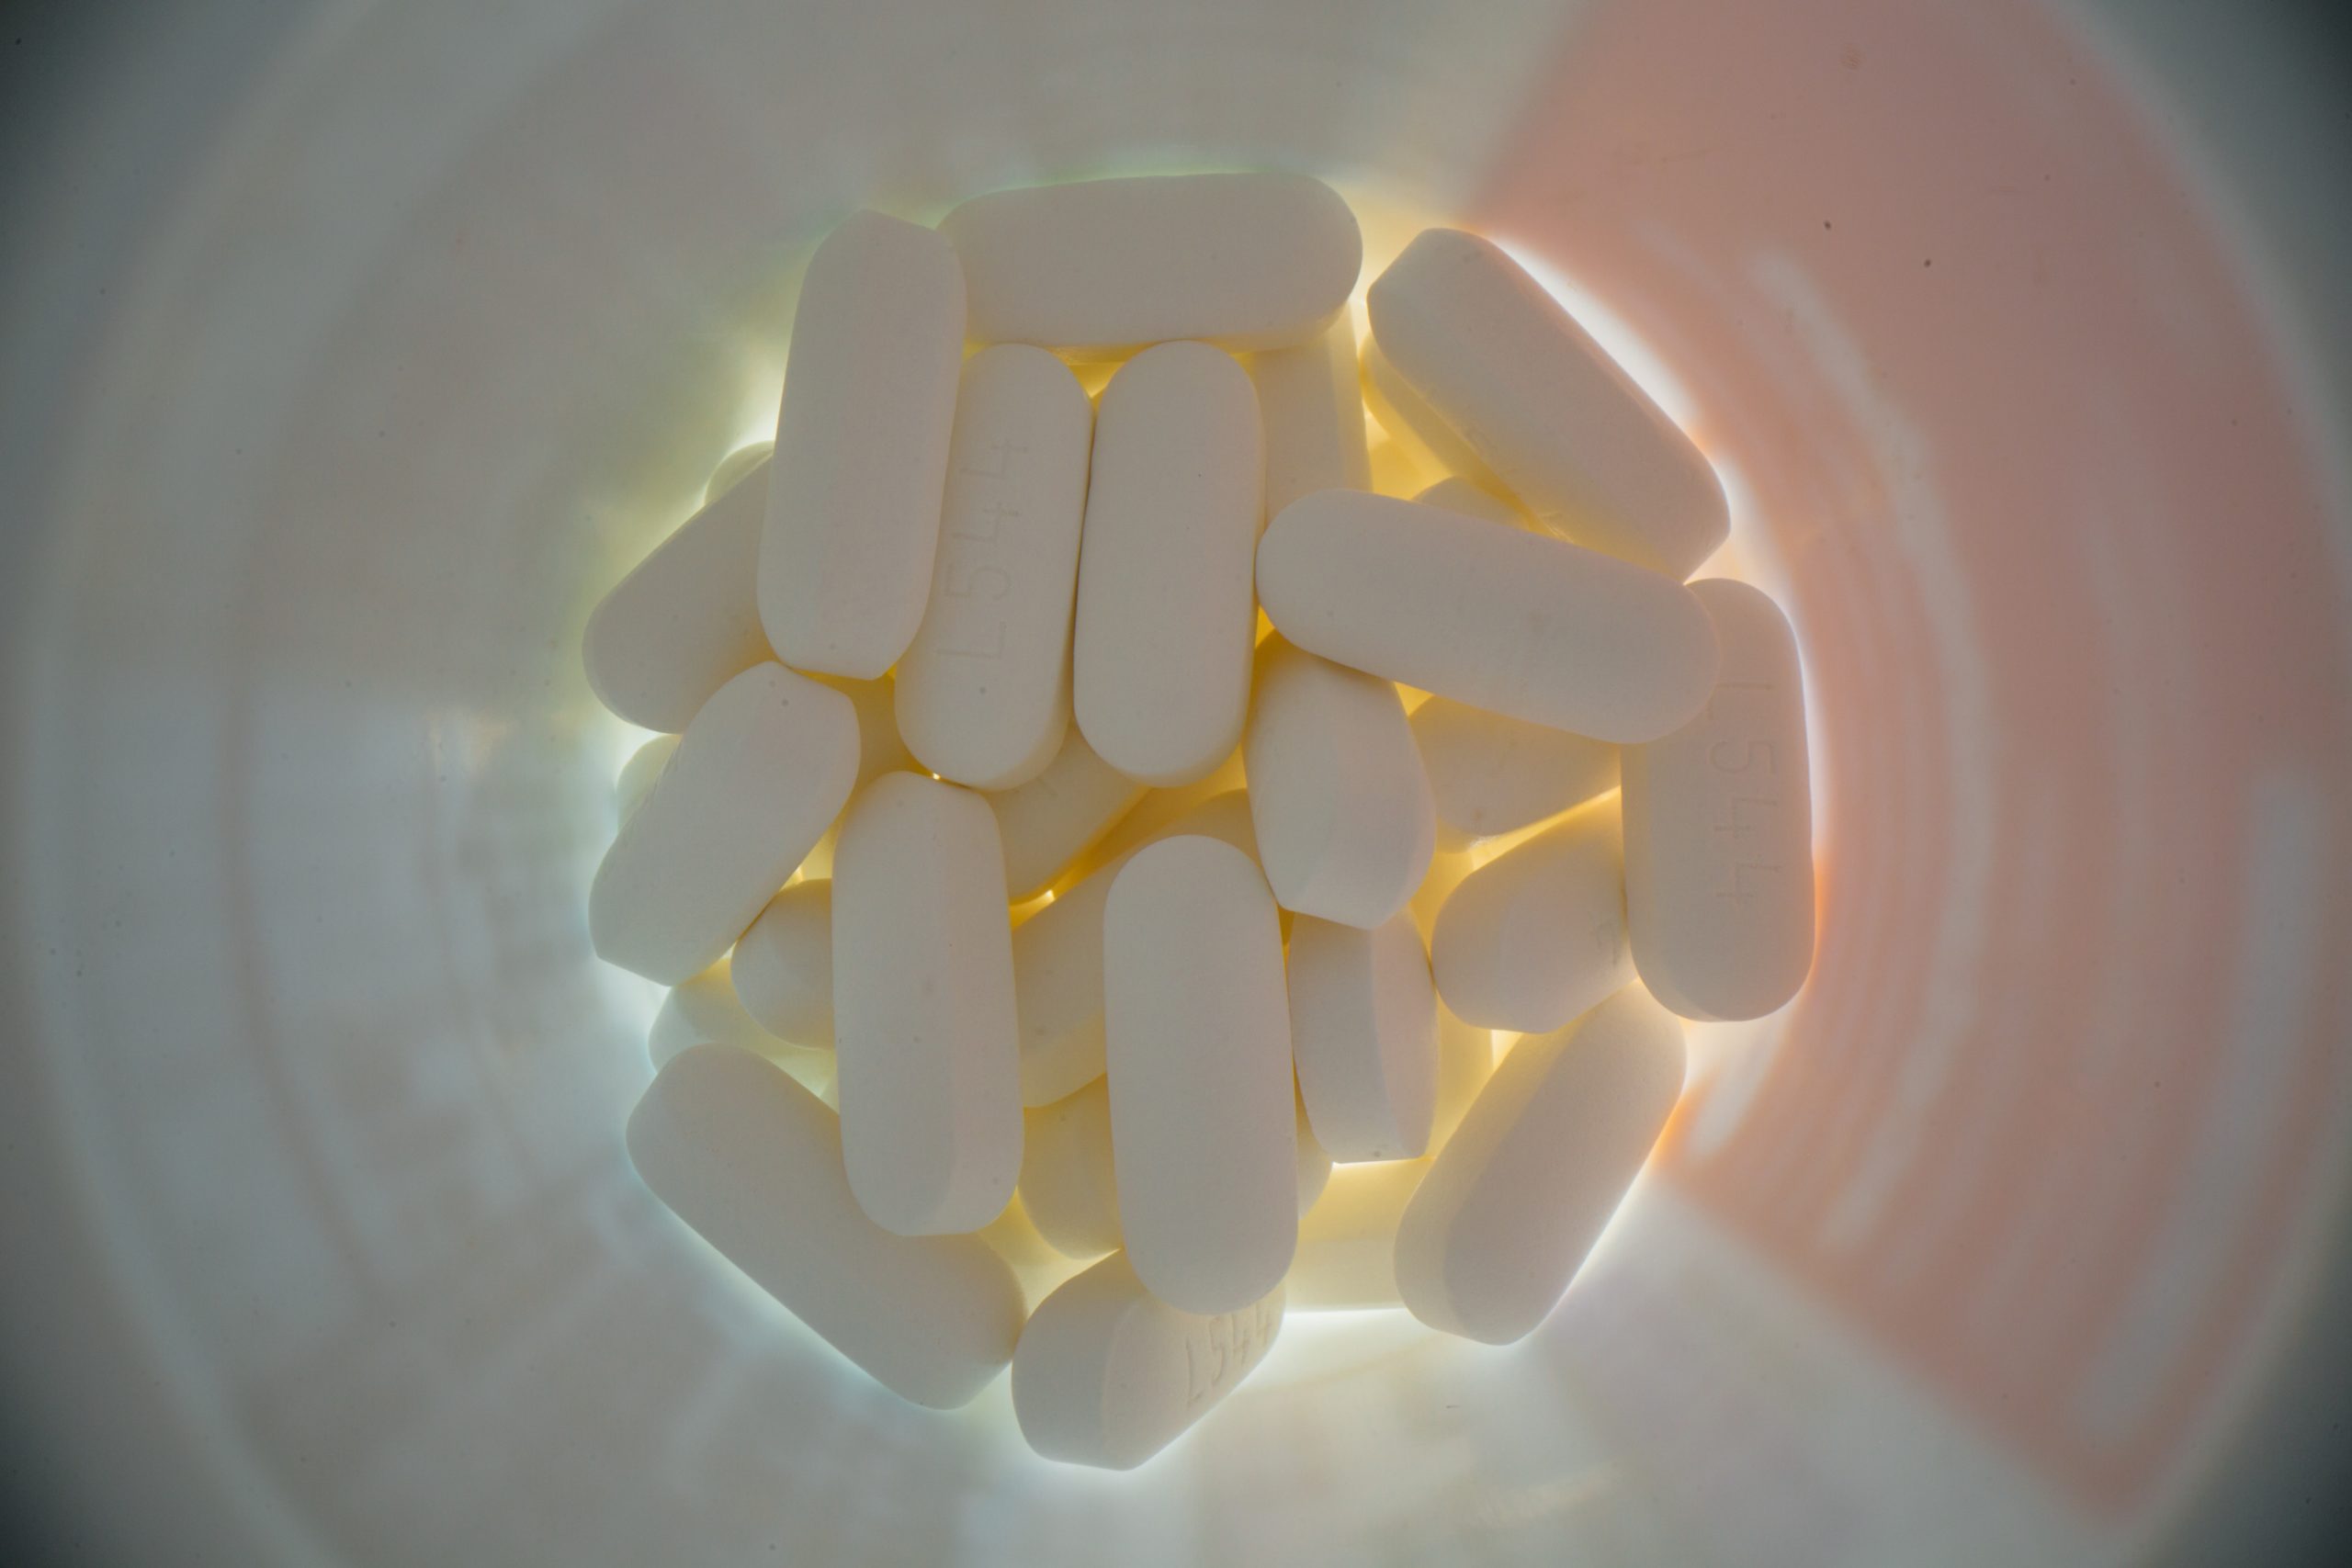 Looking down into a bottle of pills